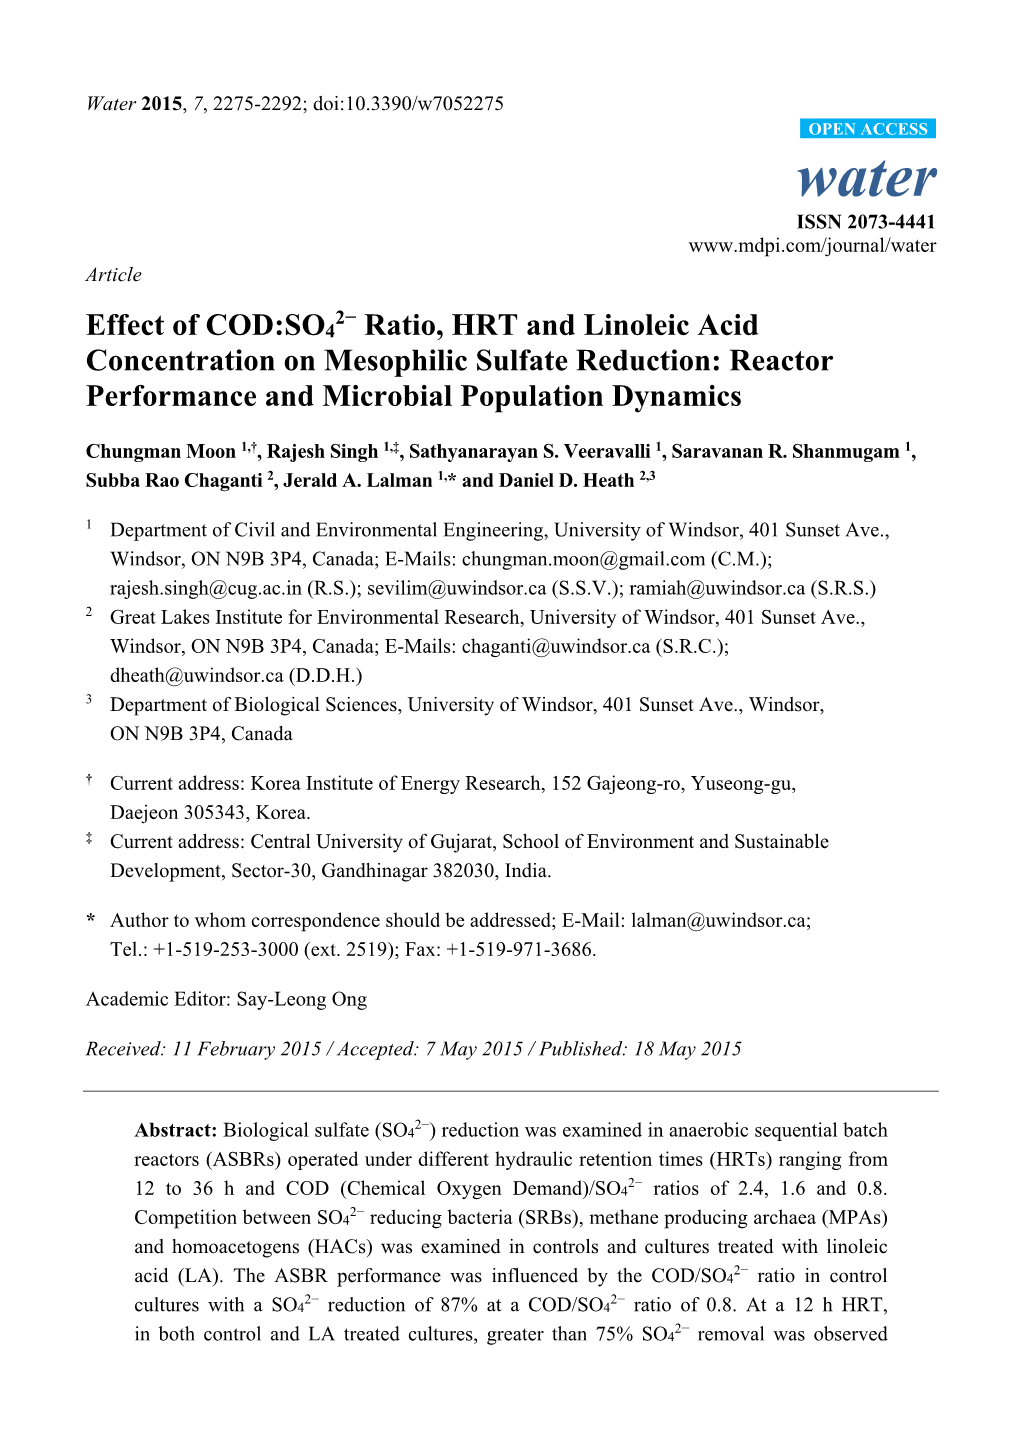 Ratio, HRT and Linoleic Acid Concentration on Mesophilic Sulfate Reduction: Reactor Performance and Microbial Population Dynamics